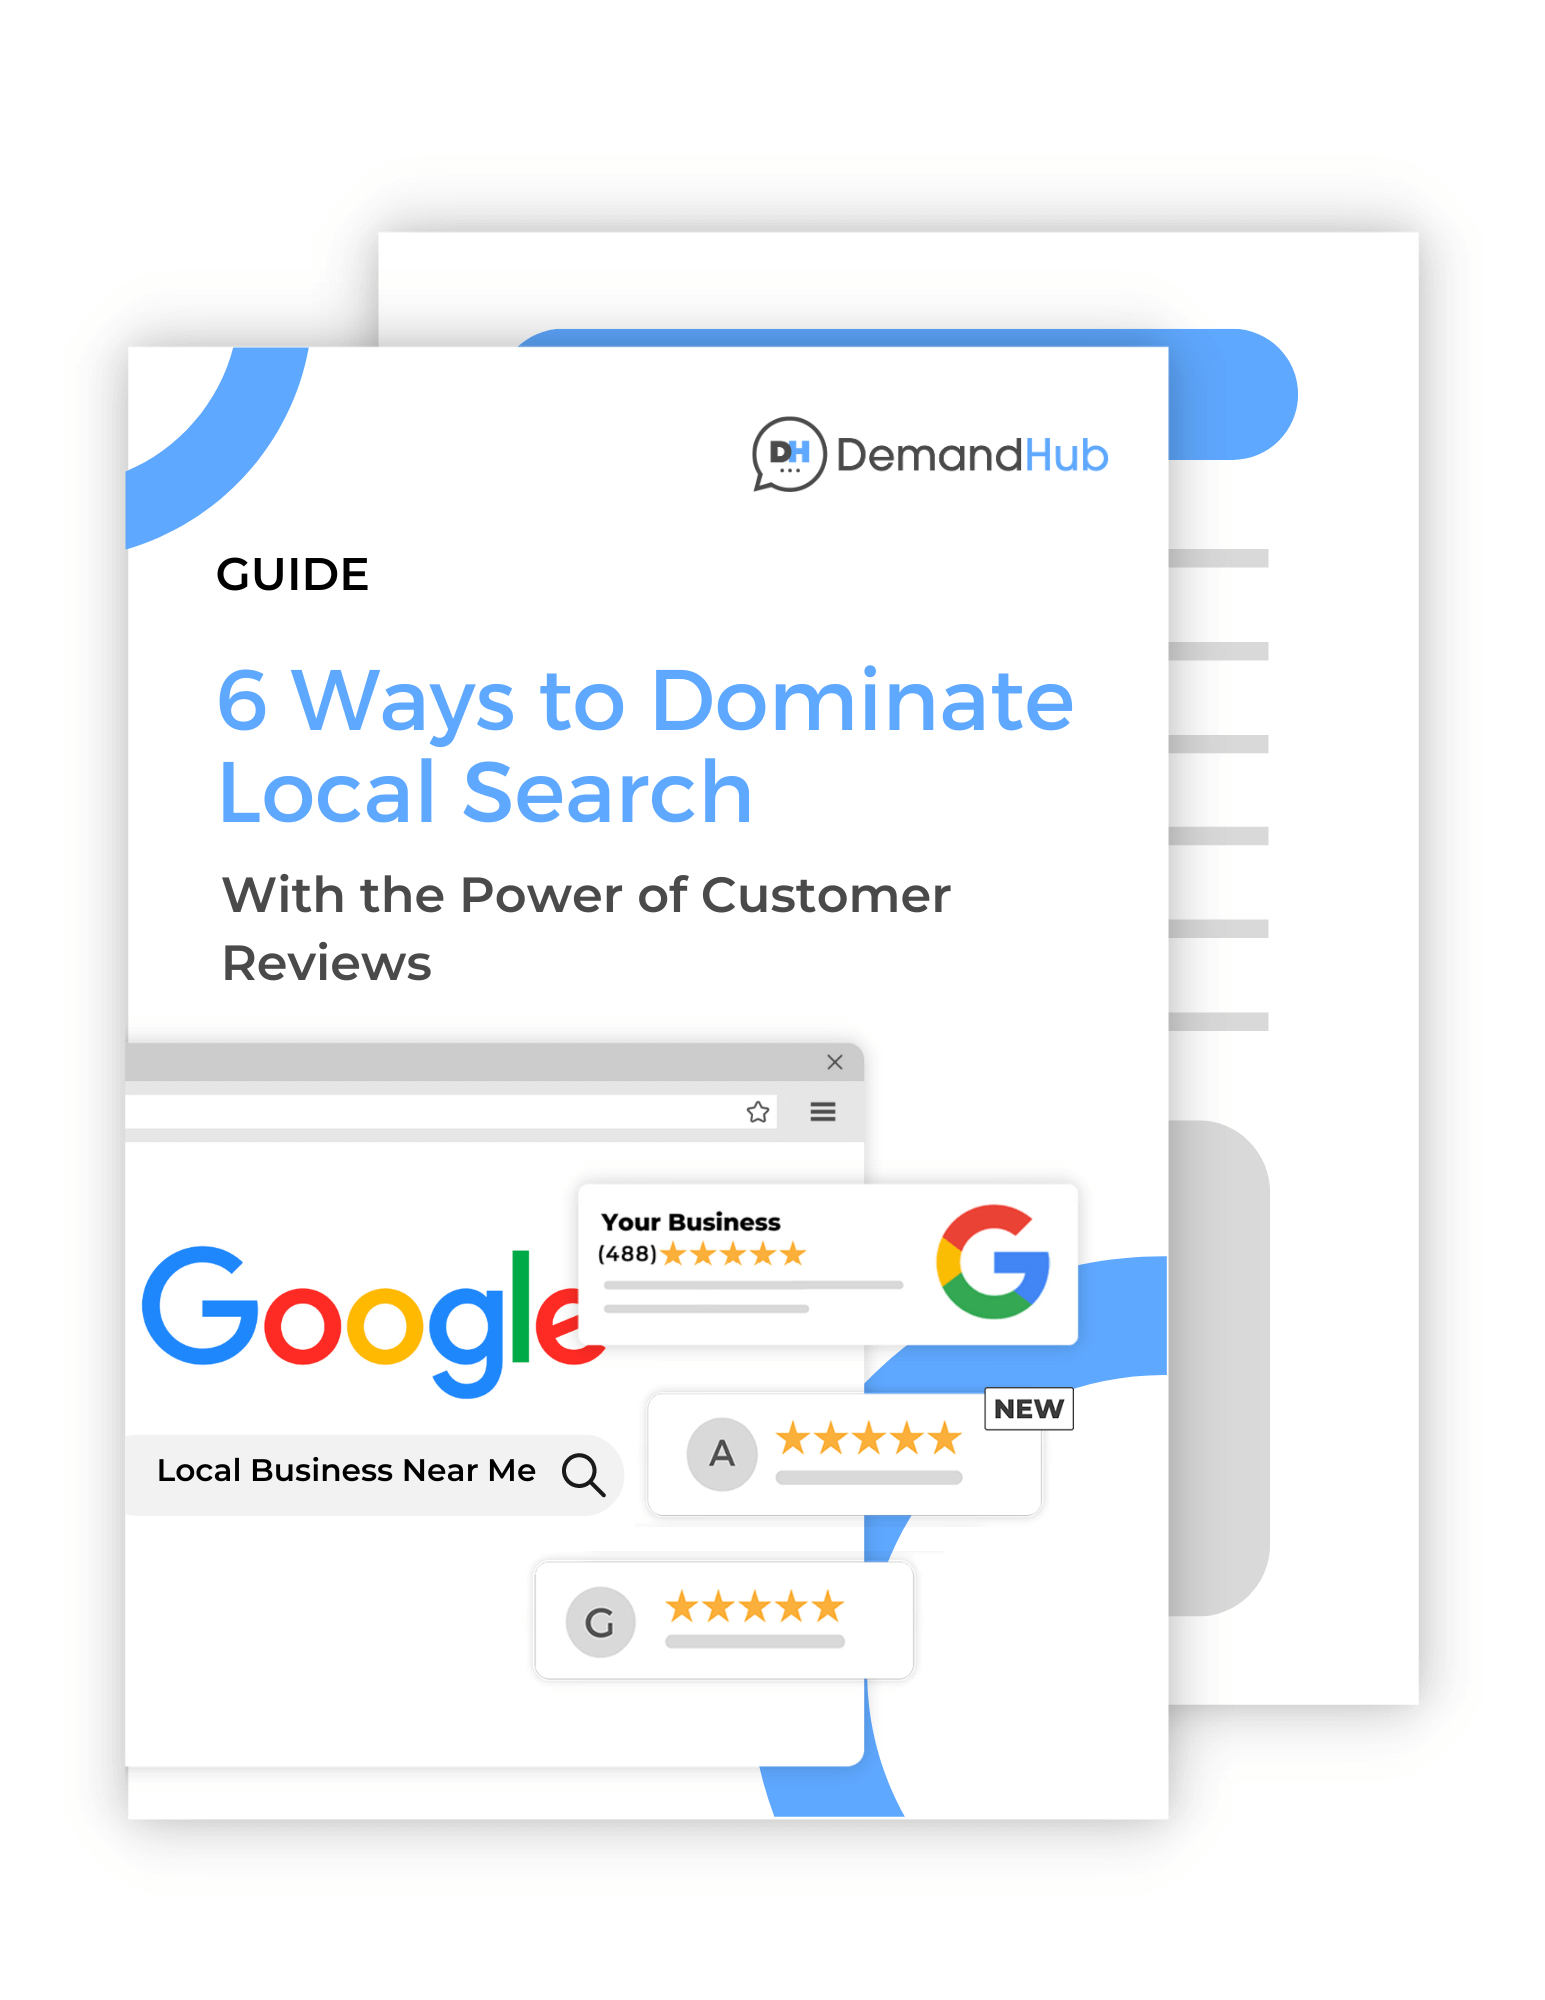 6 Ways Your Business Can Use Customer Reviews to Dominate Local Search